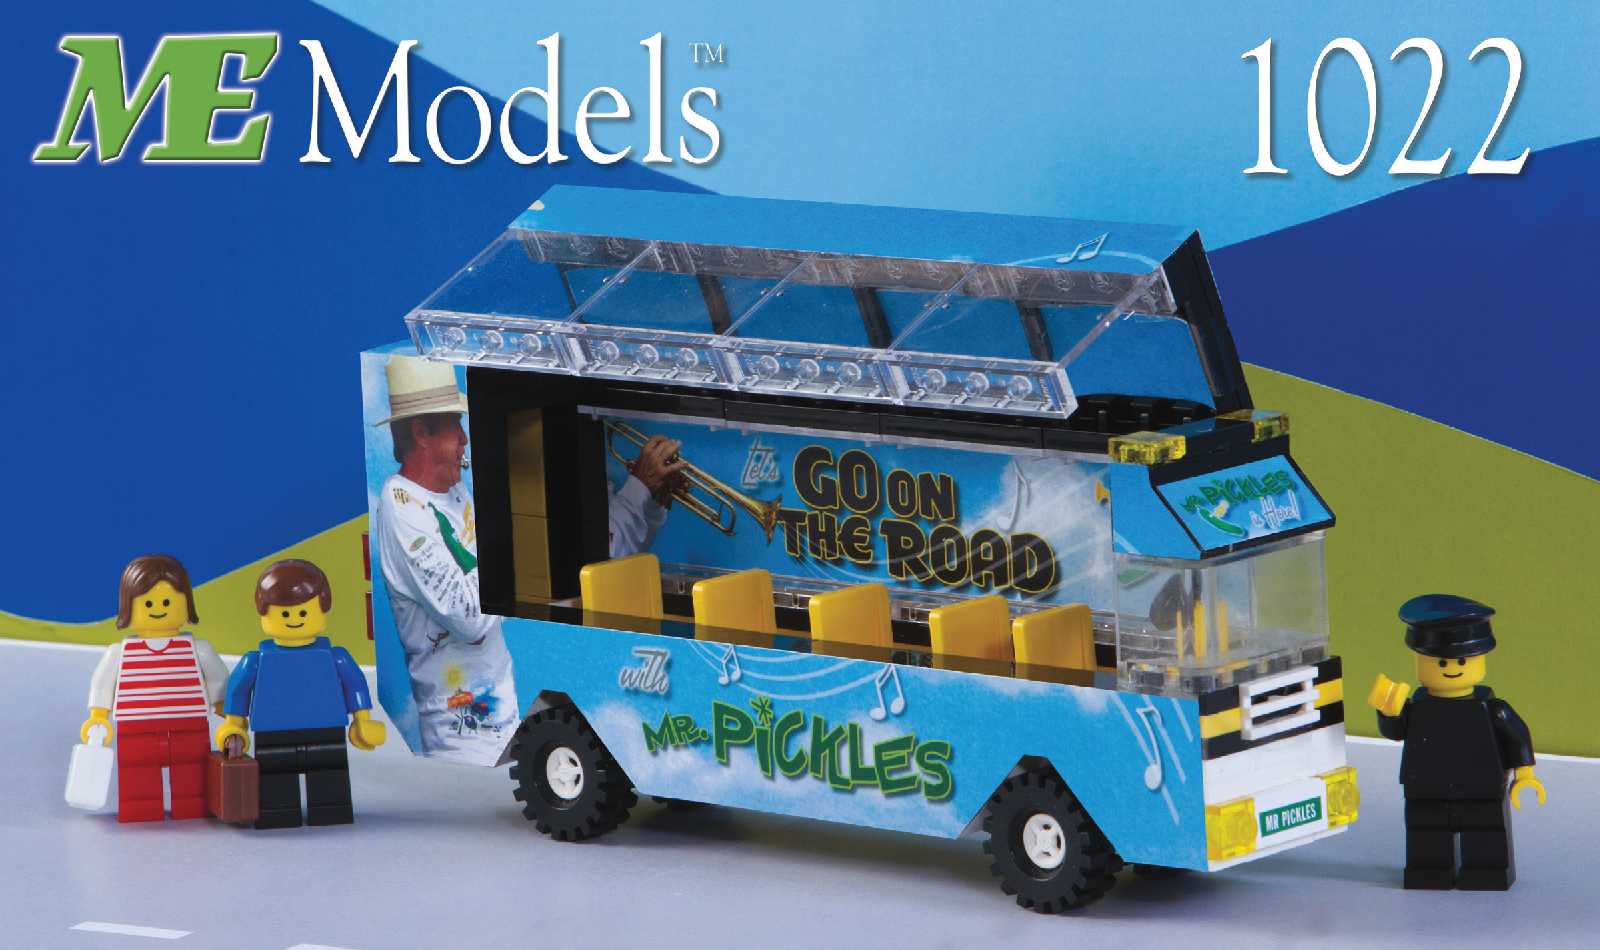 Lego toy bus for sale!